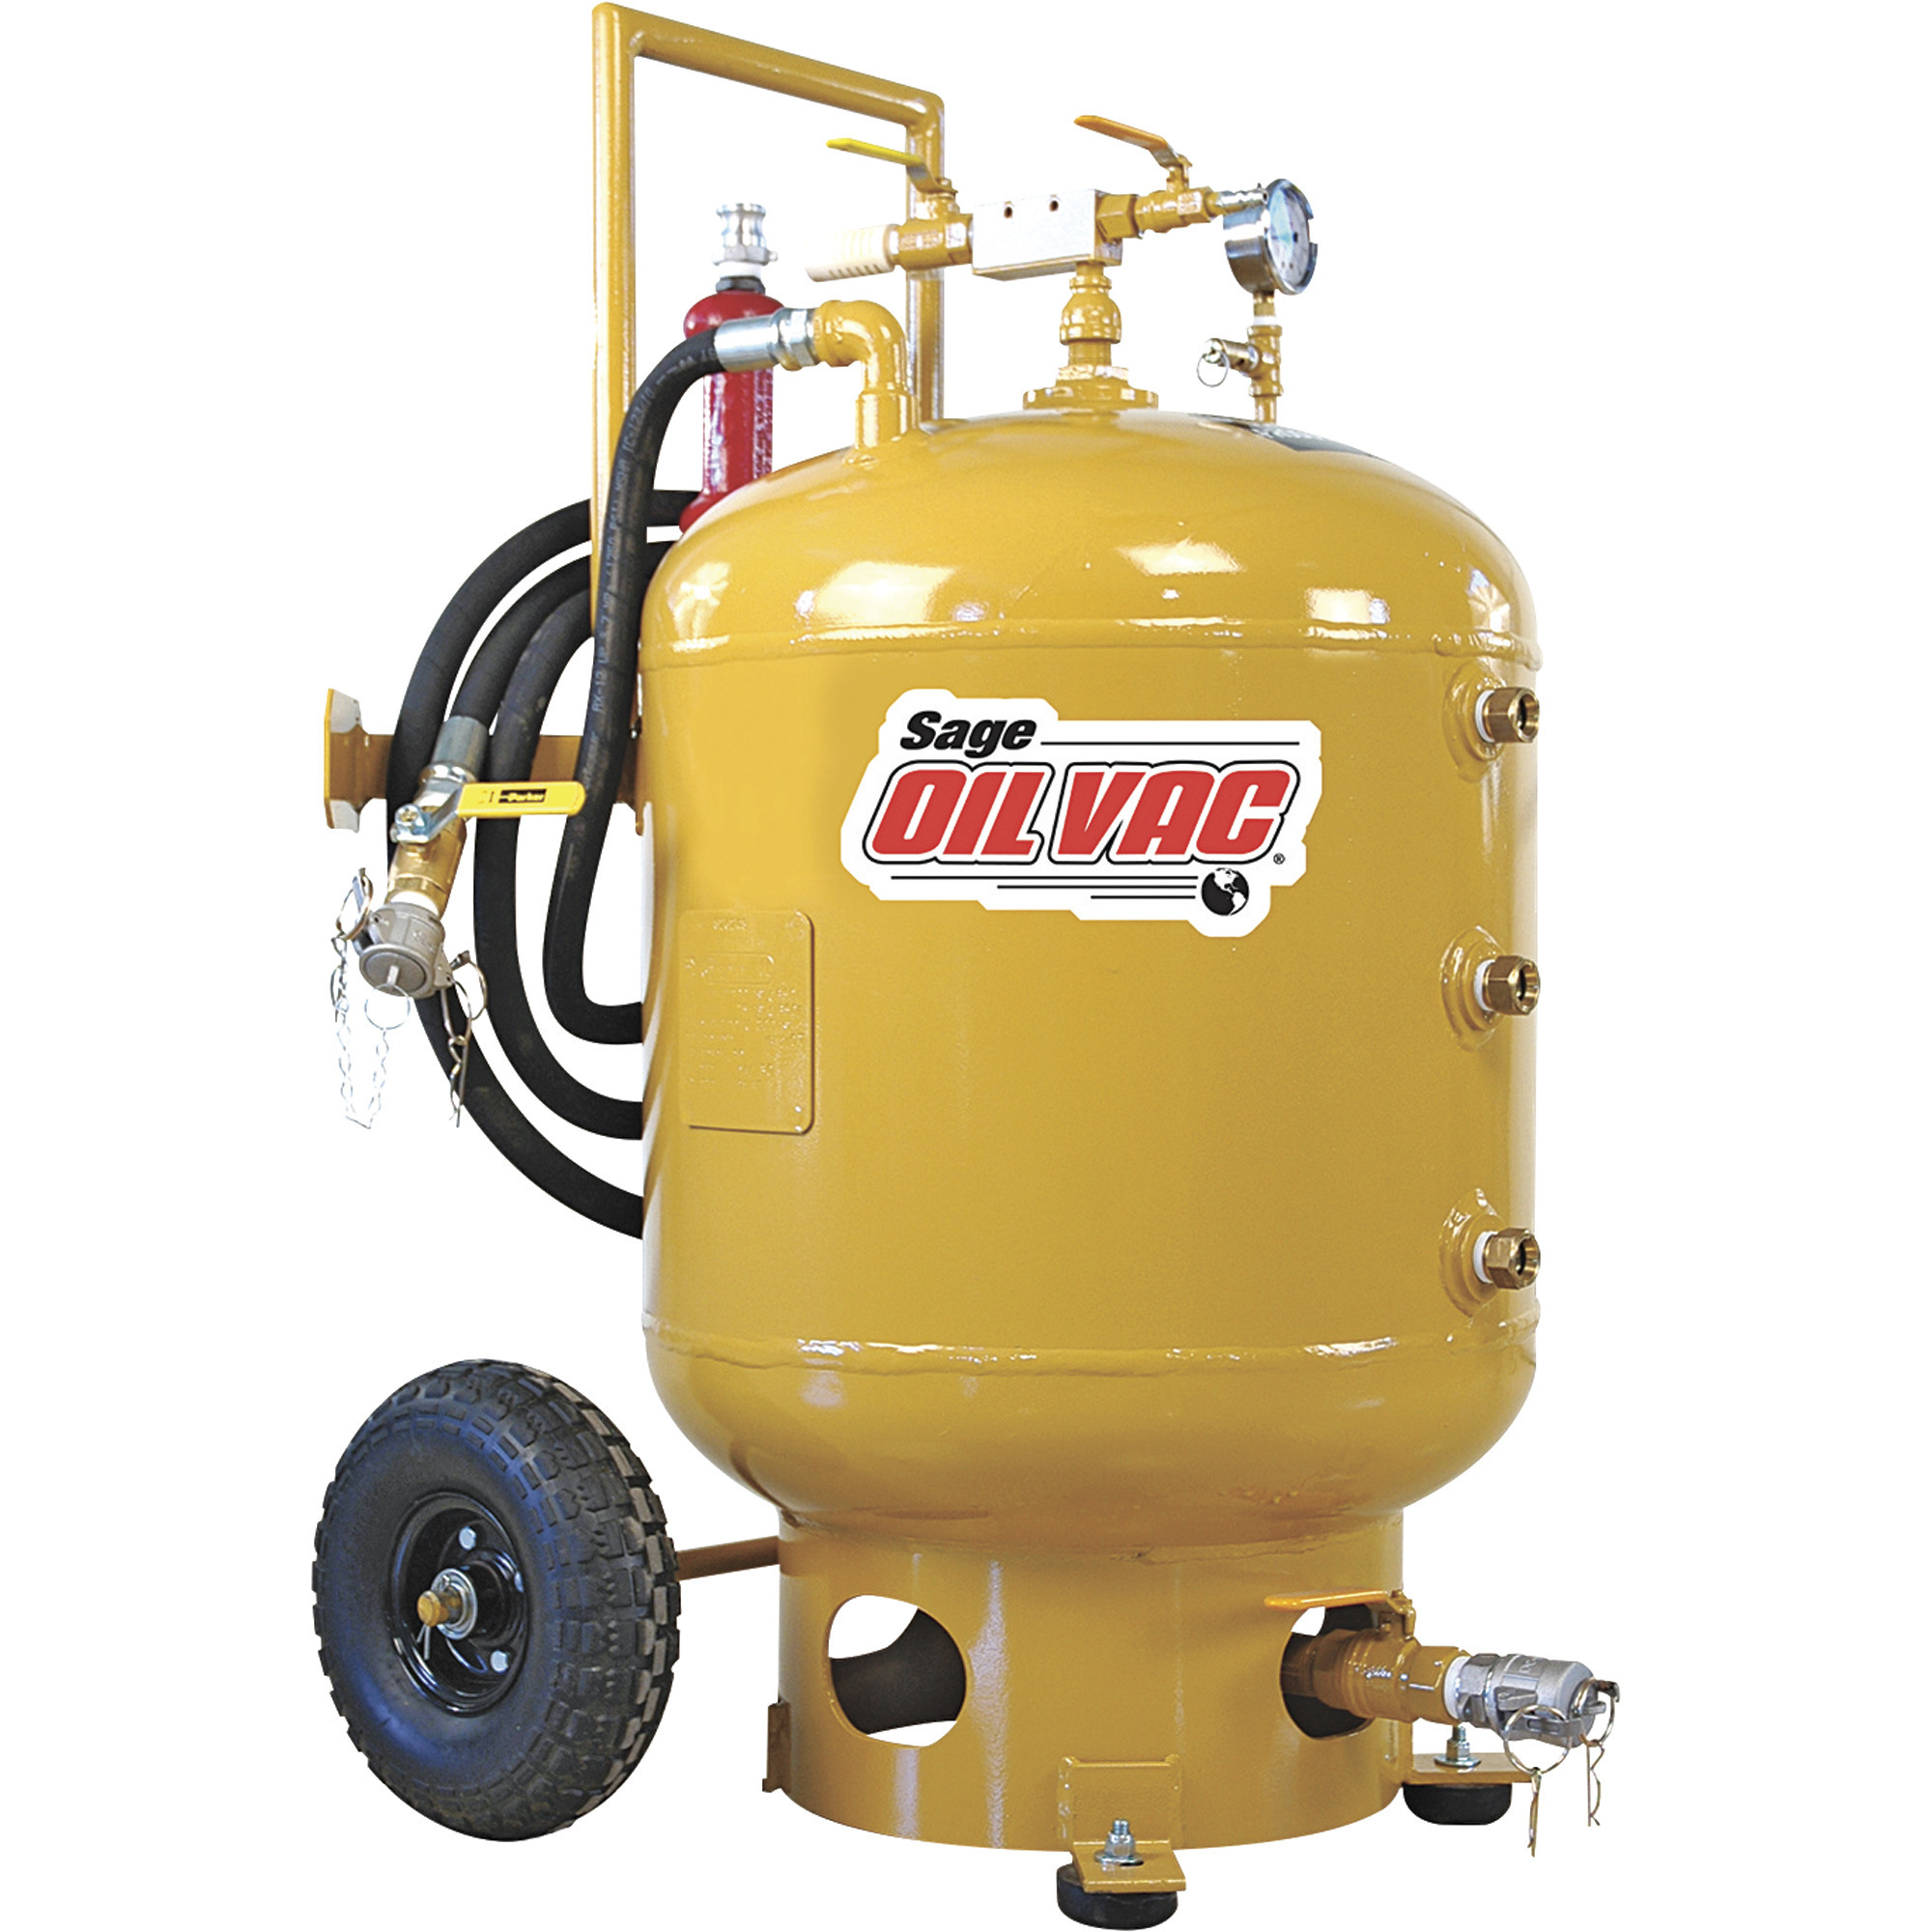 Sage Oil Vac Fluid Recovery System â 30 Gallons, Model 30080 Cart